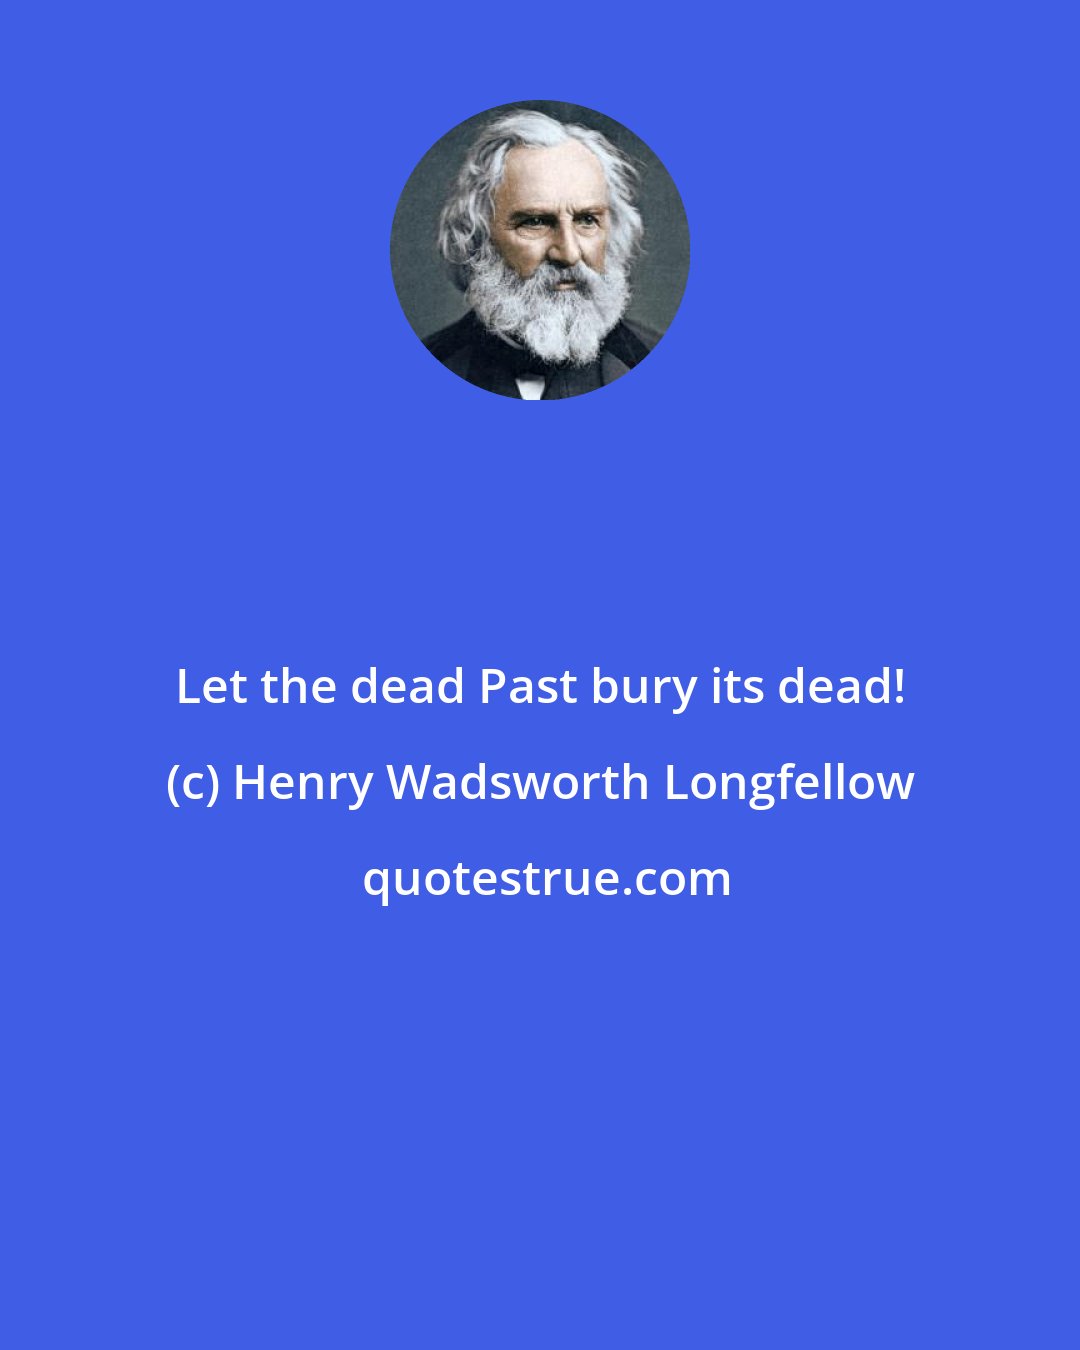 Henry Wadsworth Longfellow: Let the dead Past bury its dead!